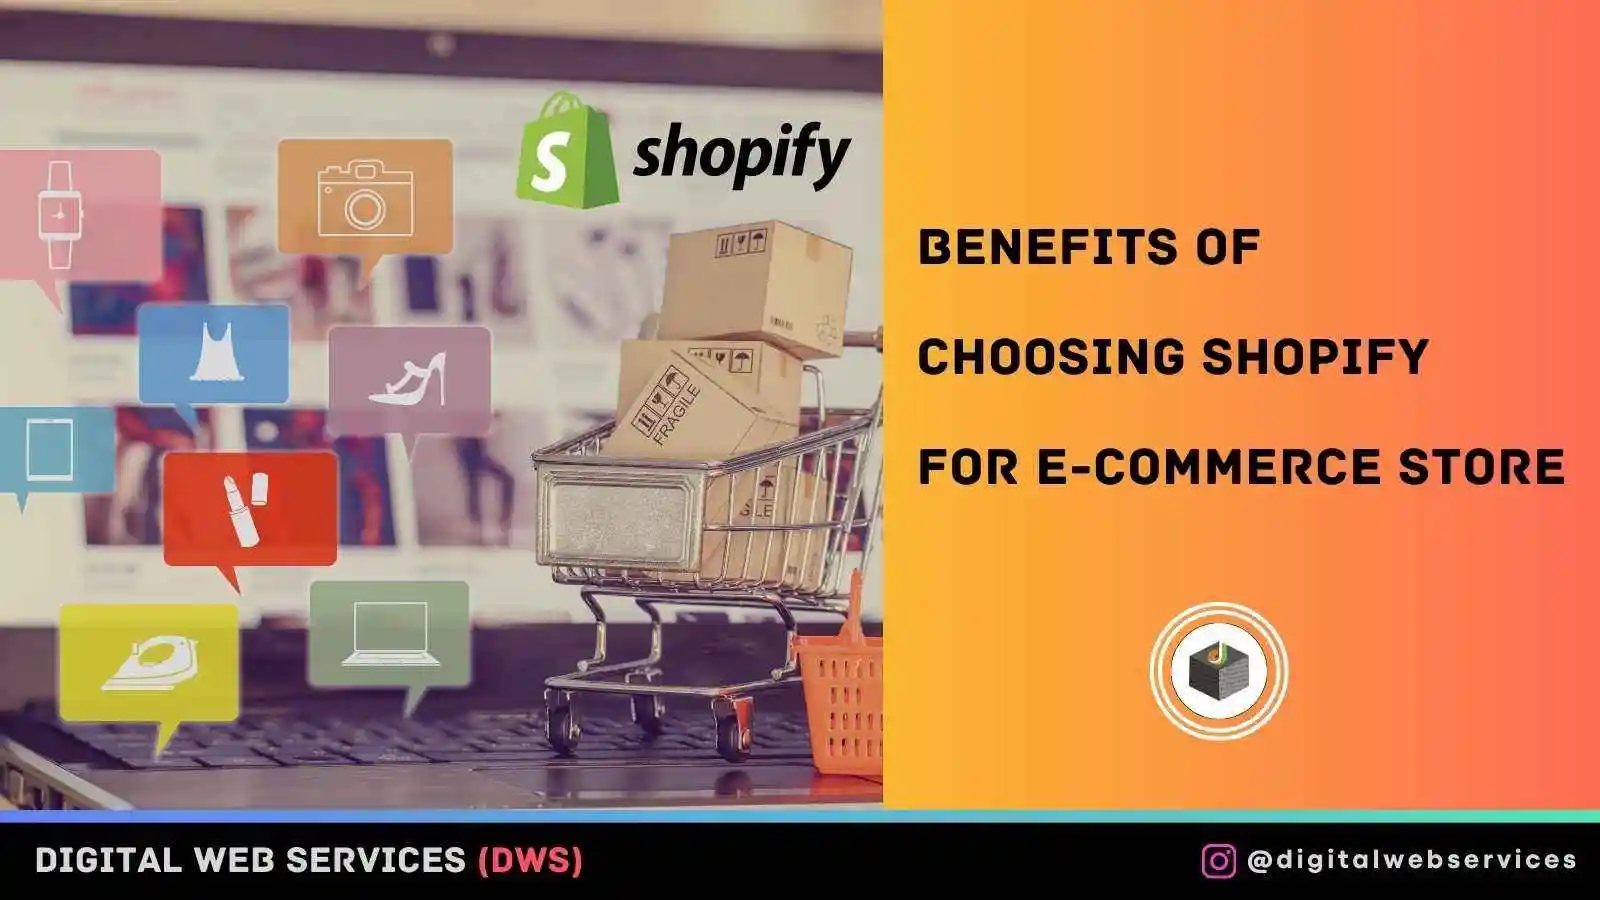 Benefits Of Choosing Shopify For E-Commerce StoreBenefits Of Choosing Shopify For E-Commerce Store